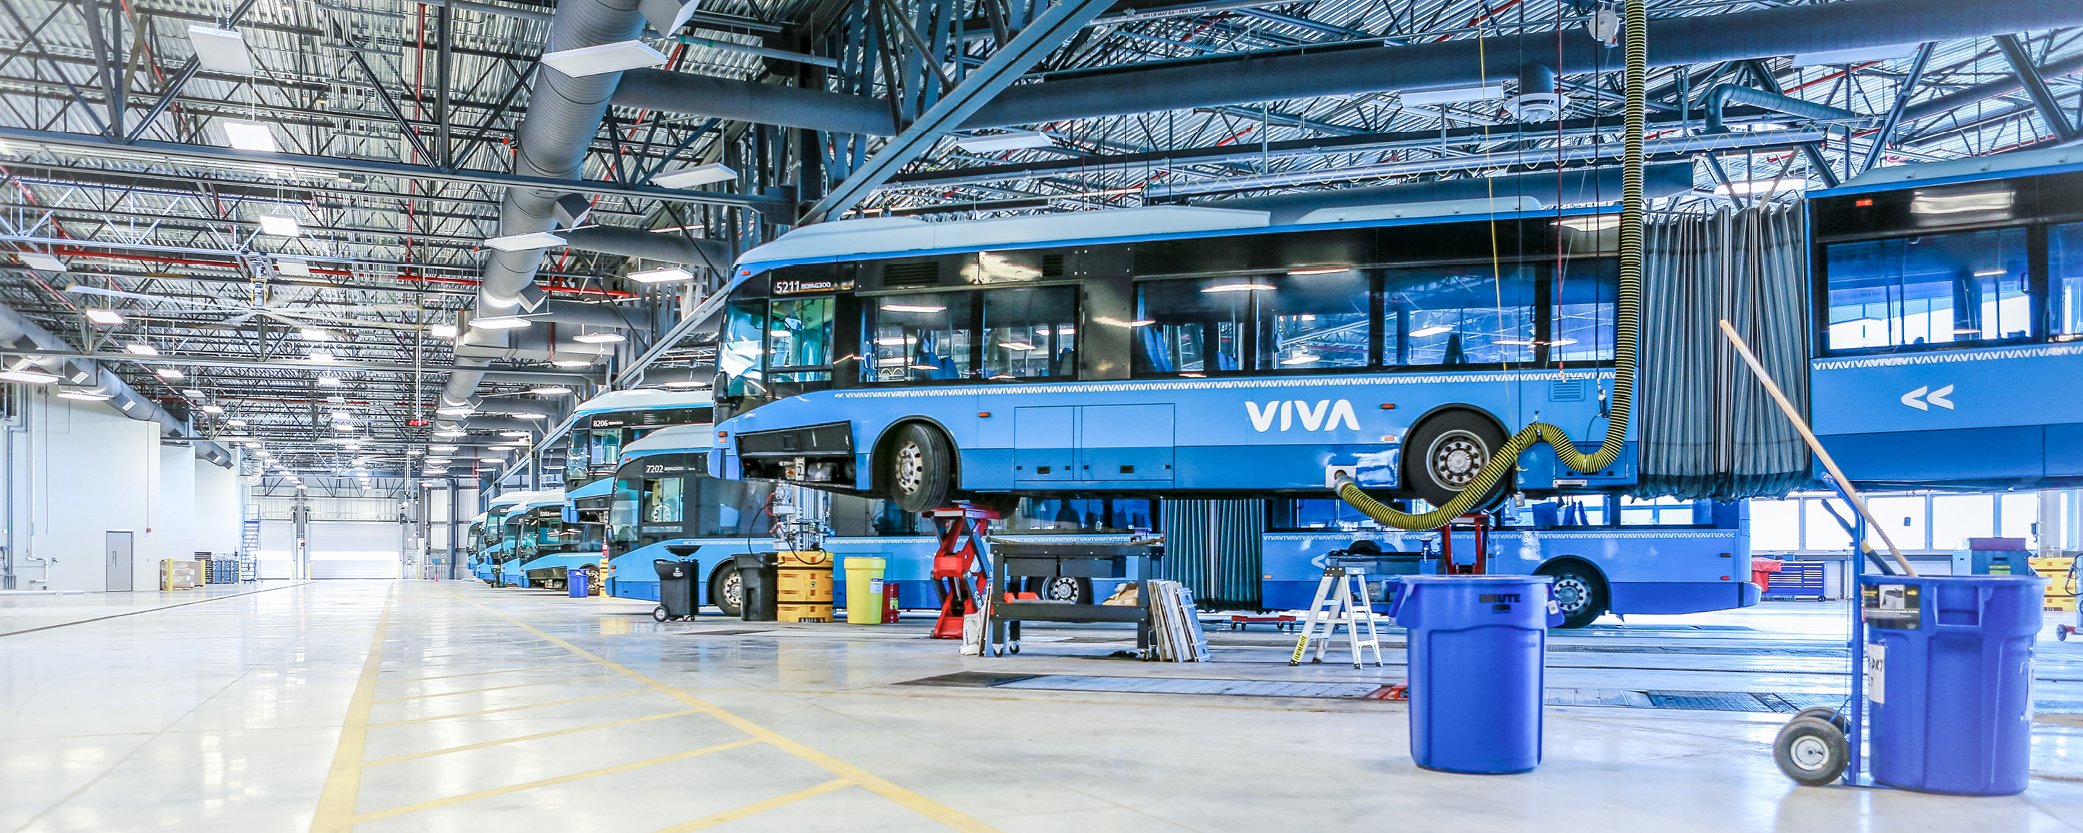 Photo of the YRT bus depot with rows of Viva buses.